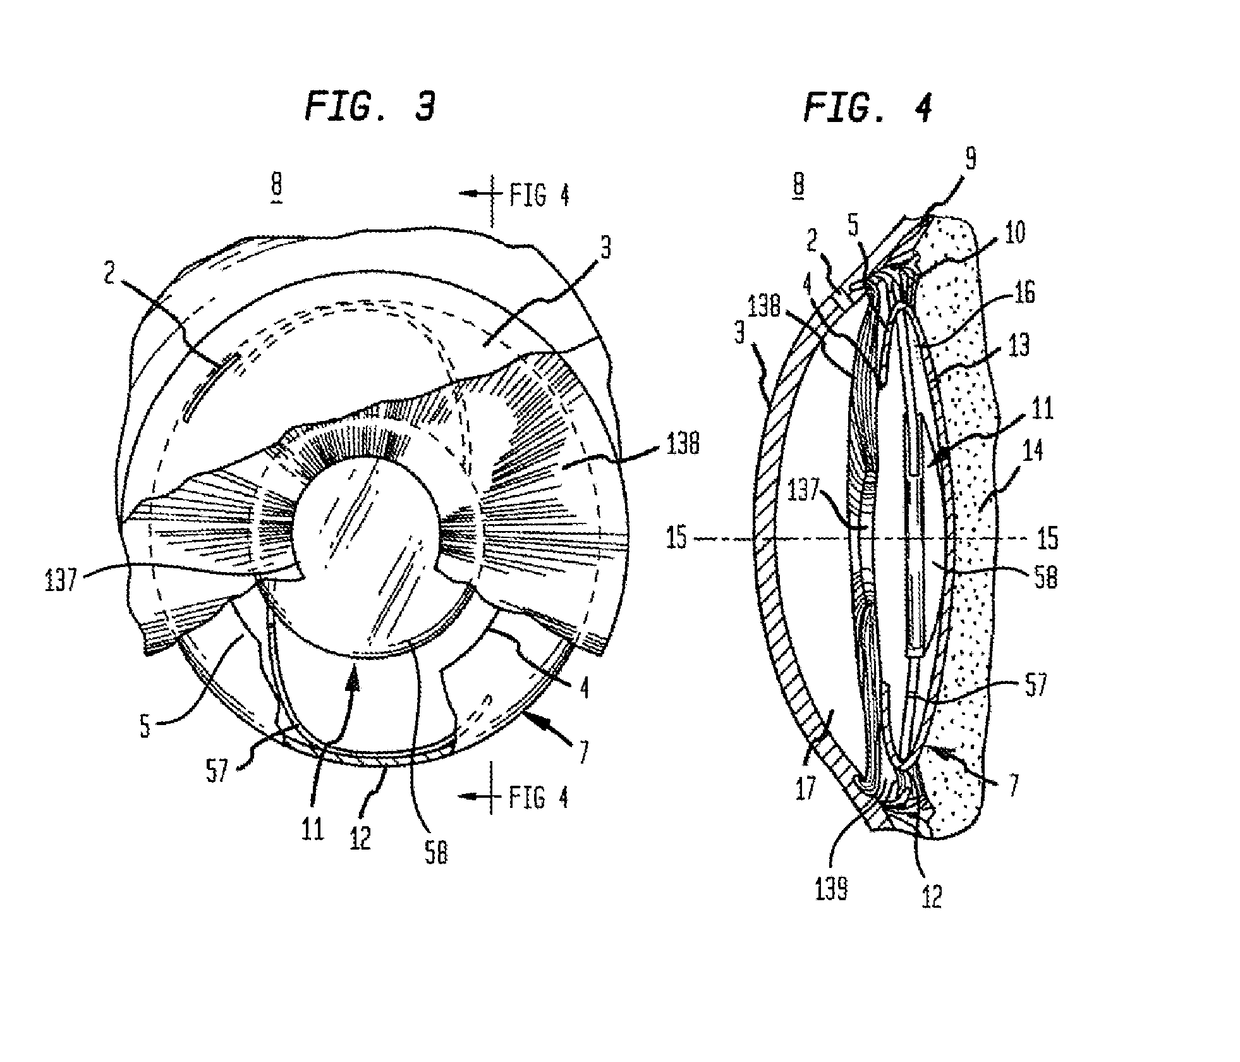 Micropatterned intraocular implants